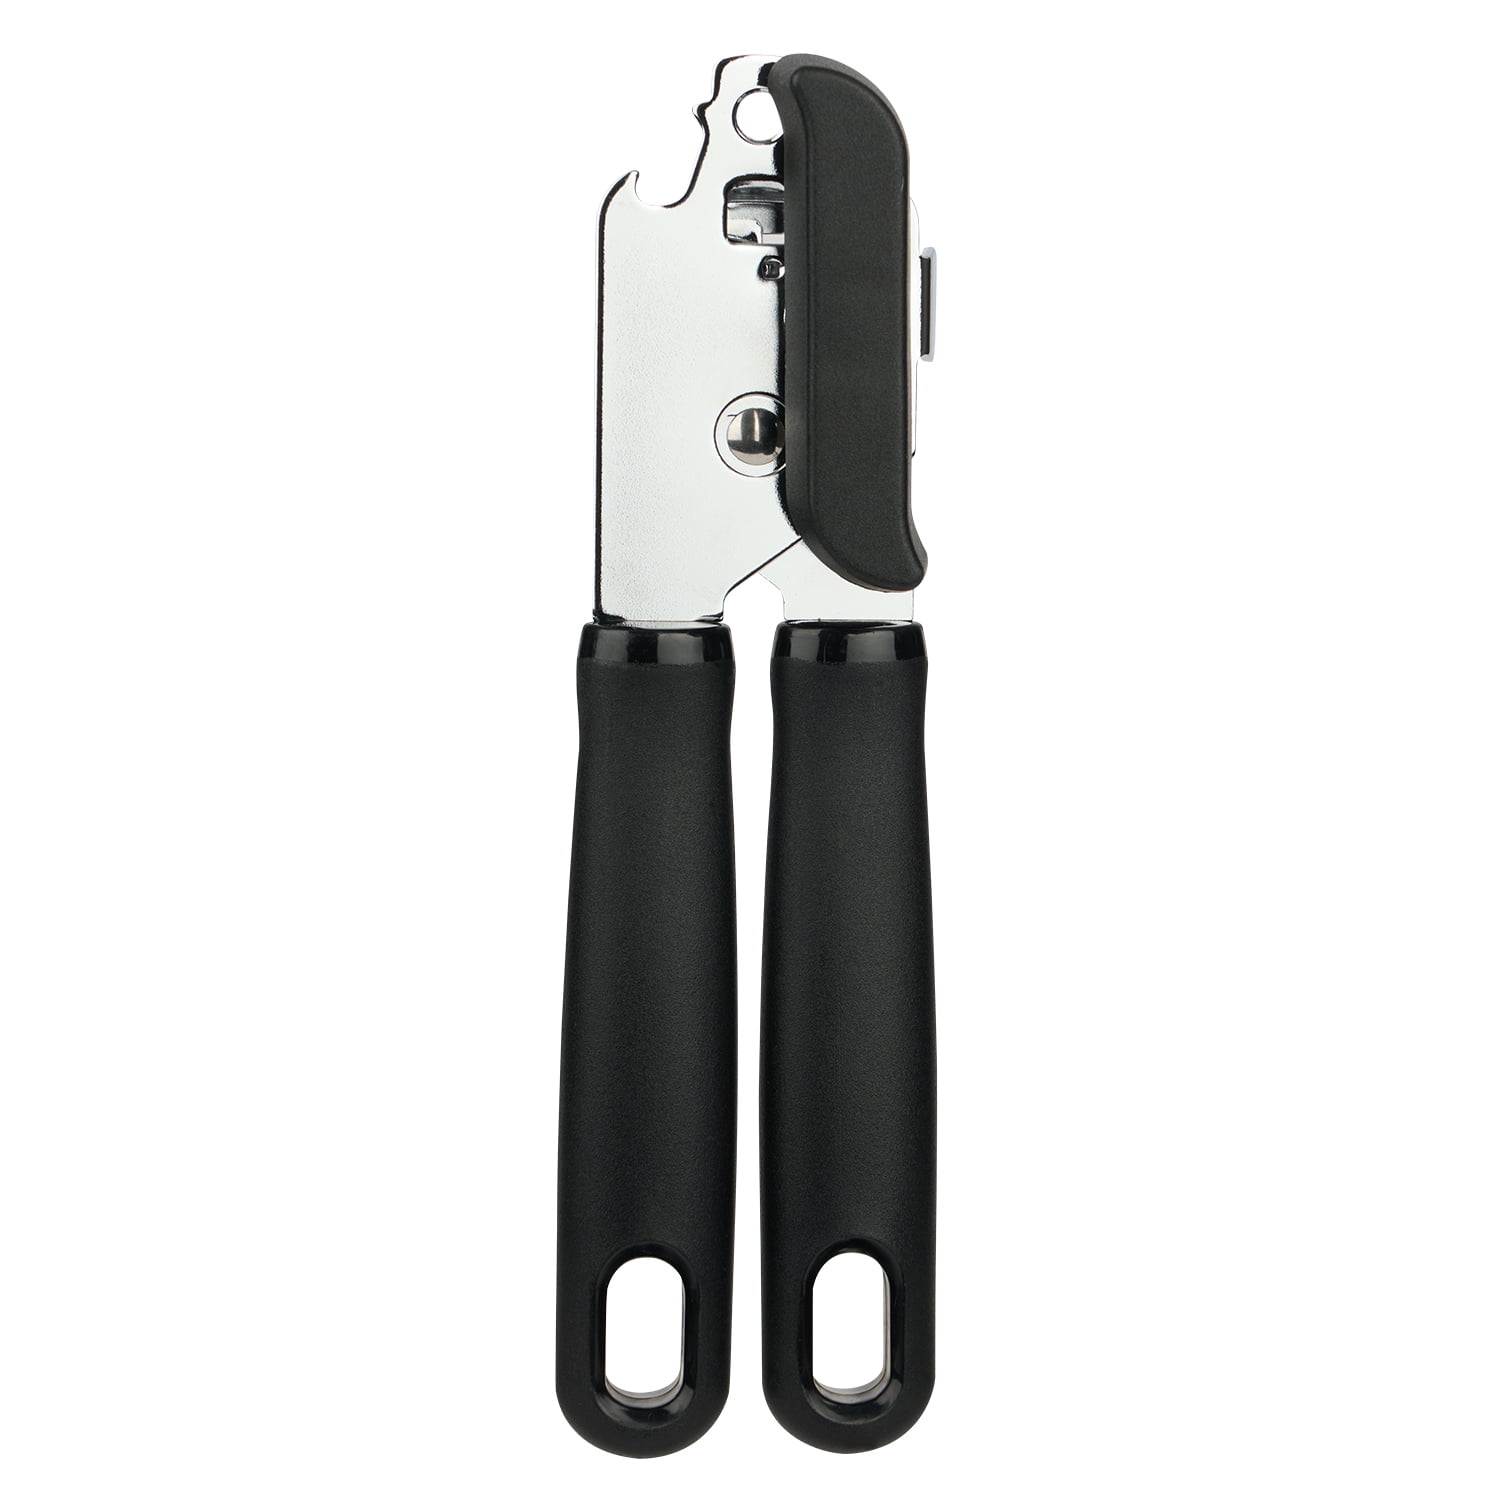 2 in 1 Safety Can Opener and Bottle Opener – DR. SAVE